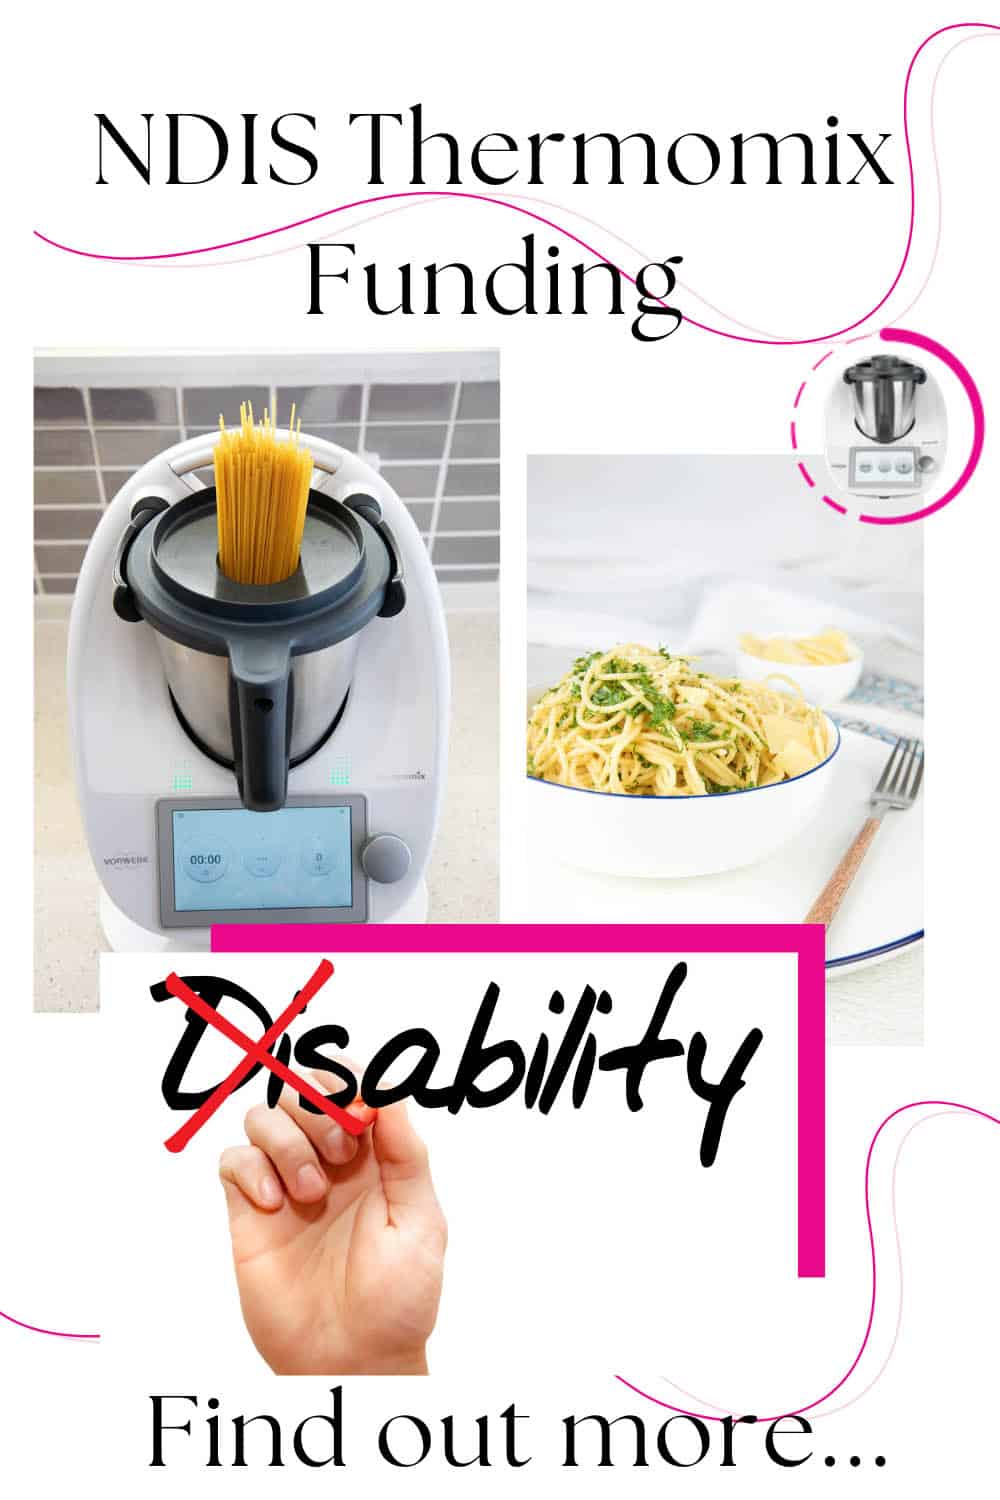 NDIS Thermomix Funding Titled Pin with 3 pictures a Thermomix a bowl of spaghetti and a hand writing Abilities